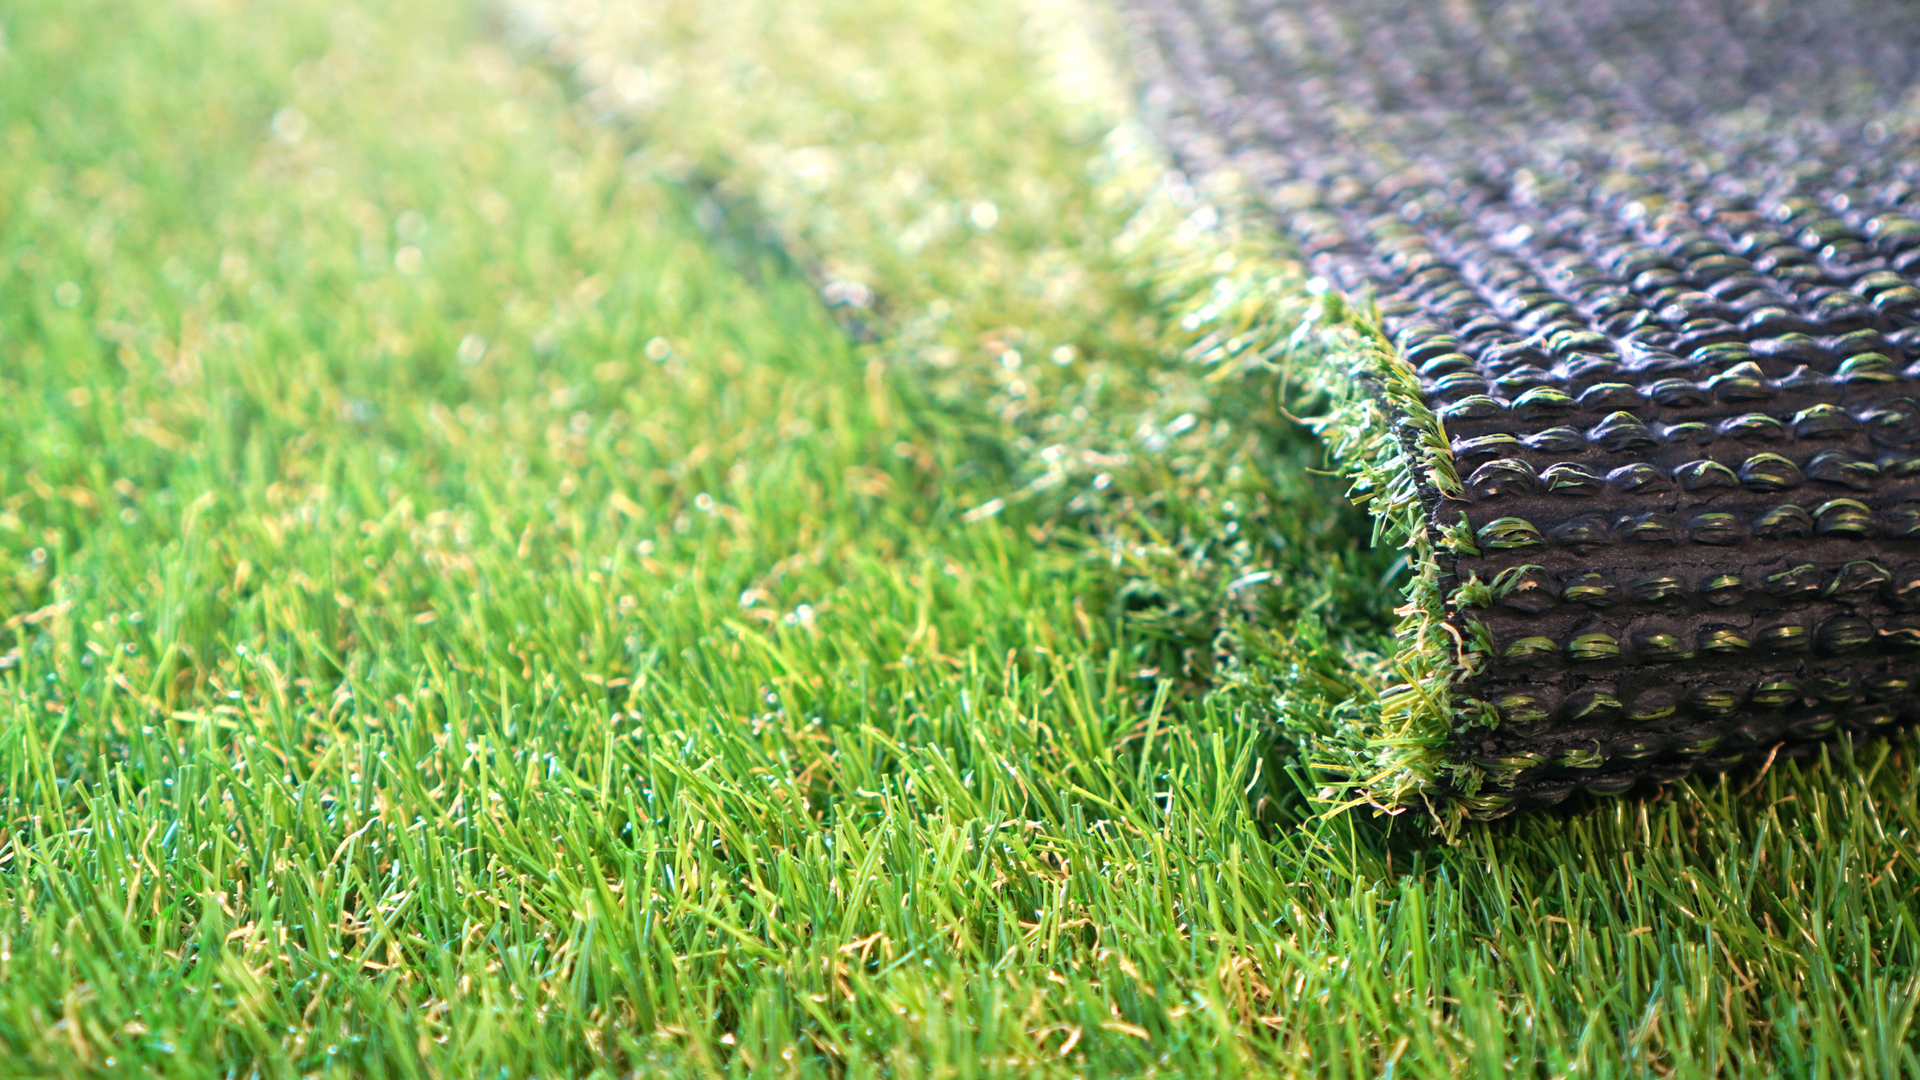 A close-up shot of artificial grass, also referred to as artificial turf.